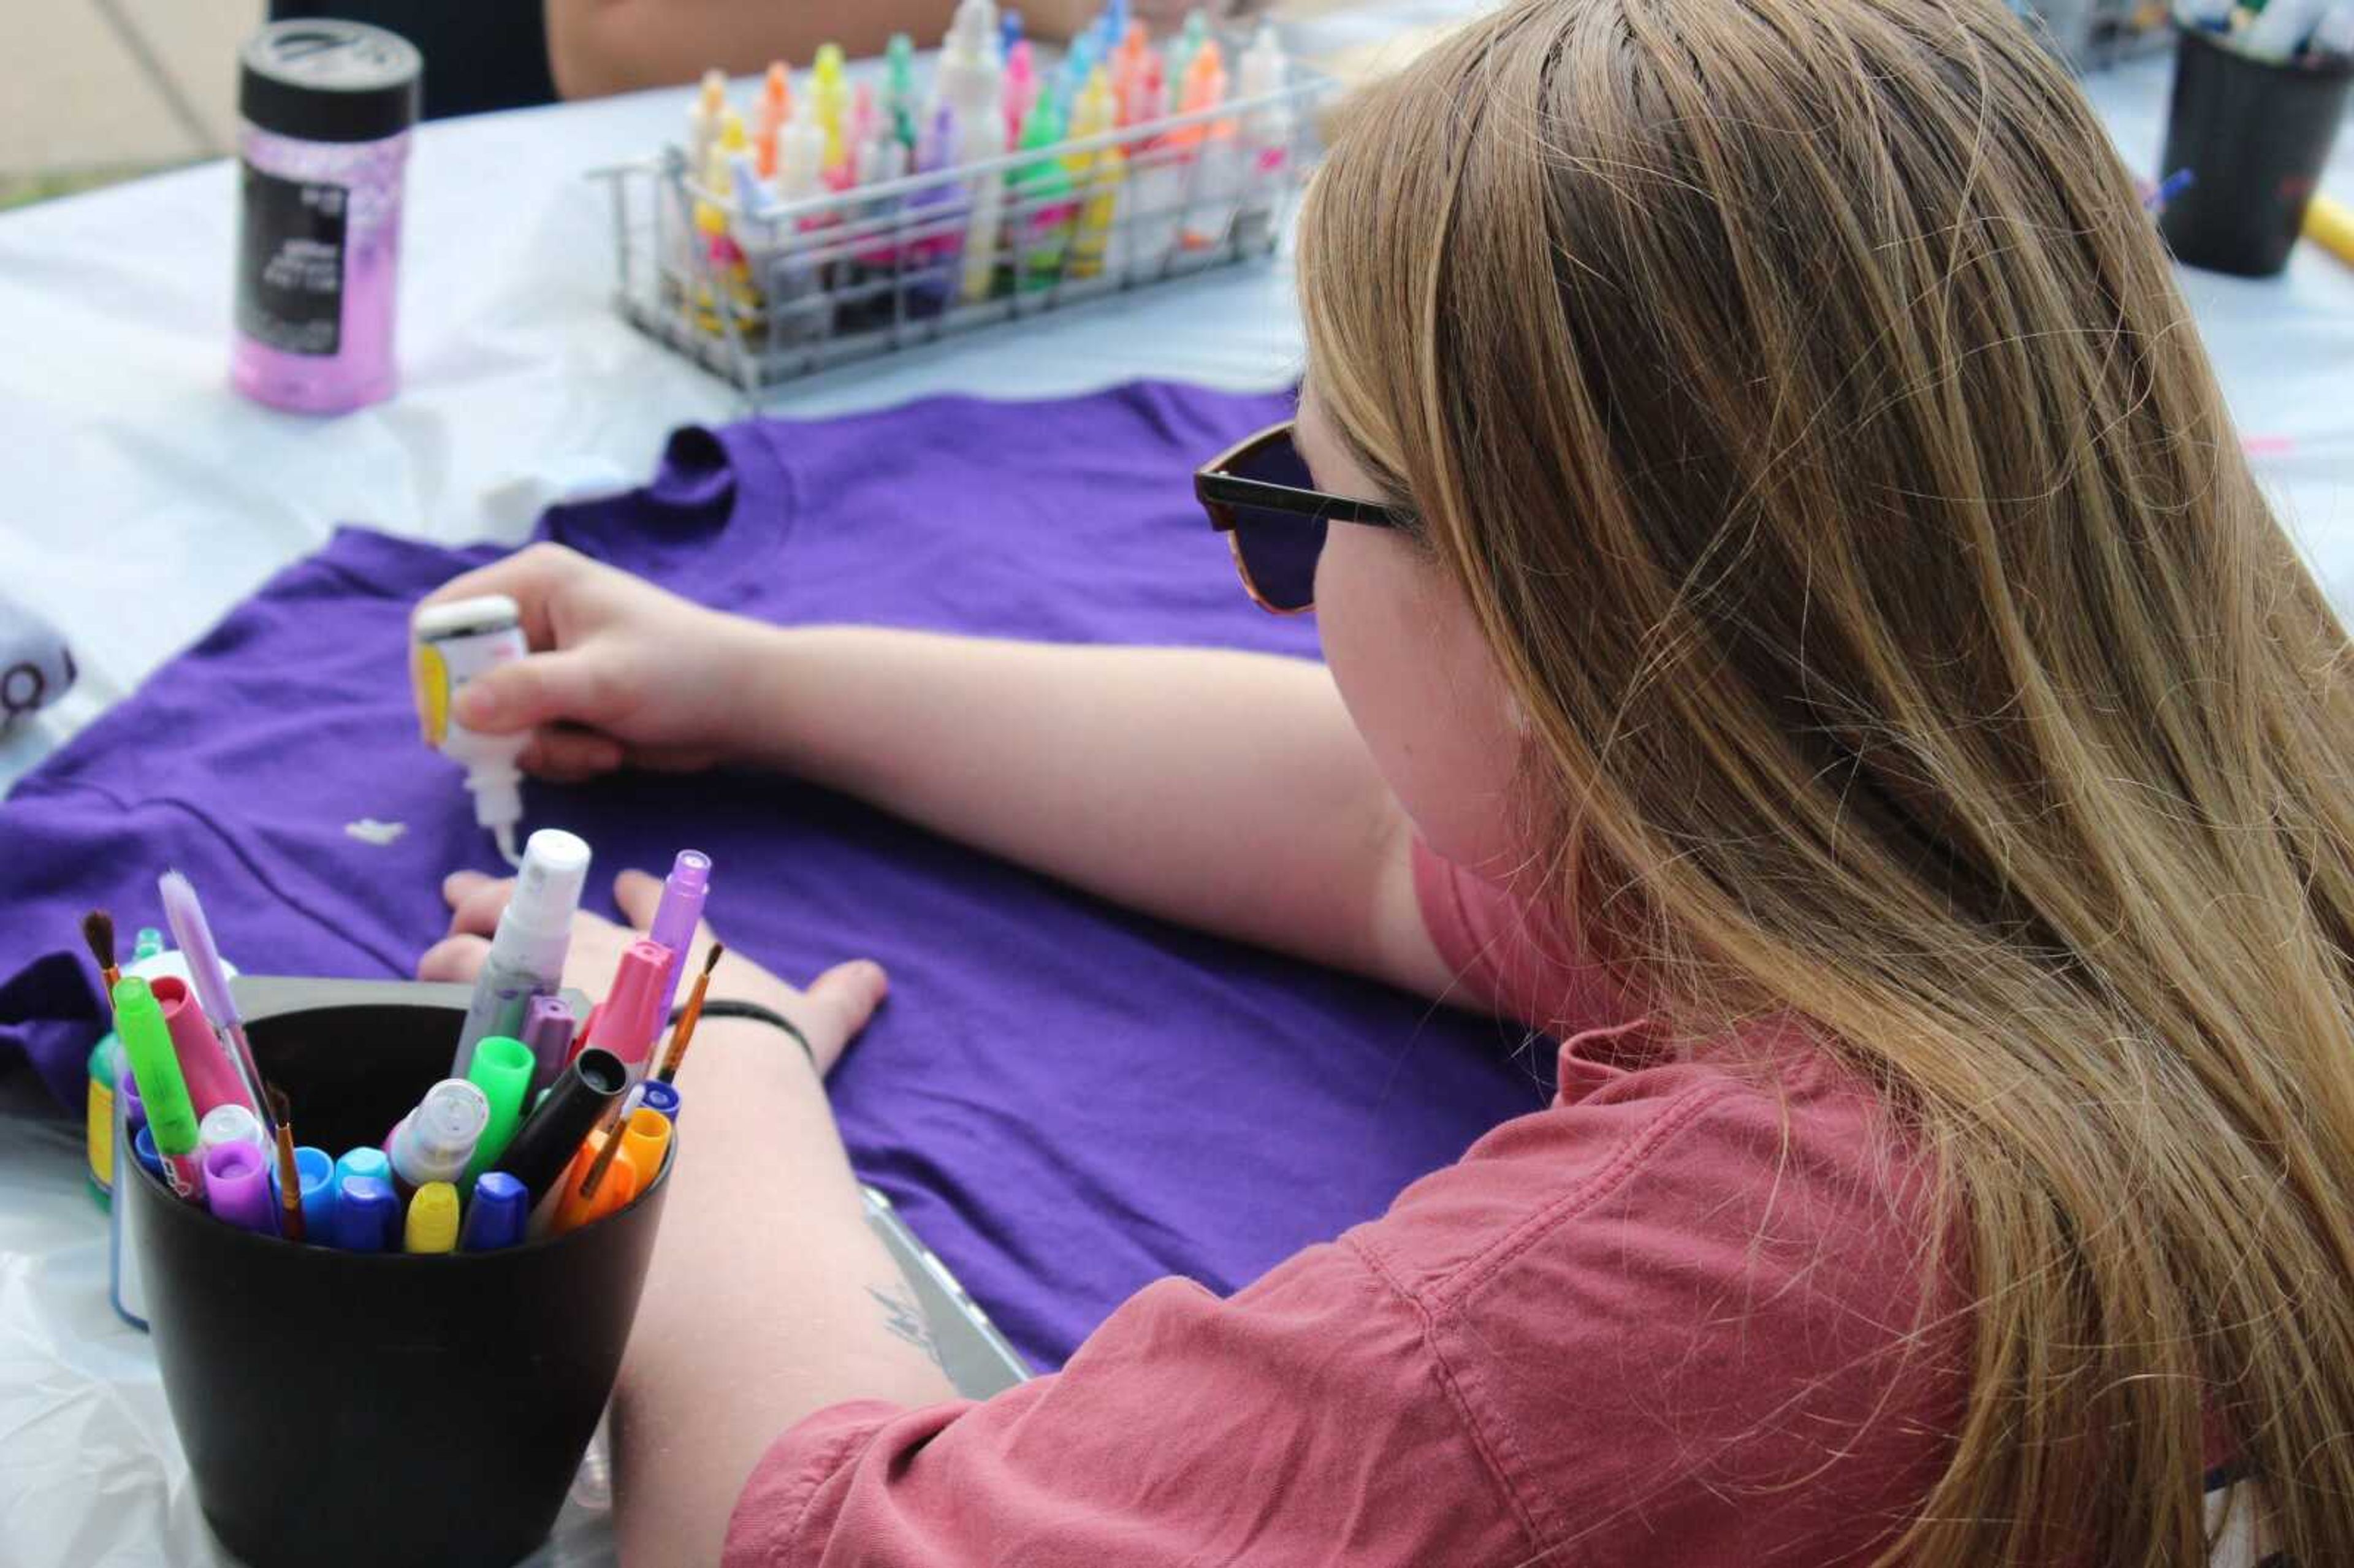 Southeast junior Rachel Rigney designs a T-shirt at the Clothesline Project on Oct. 3. on campus. Redhawks Rising, Redhawk Health Educators and the Campus Violence Prevention Program were sponsors of the event.